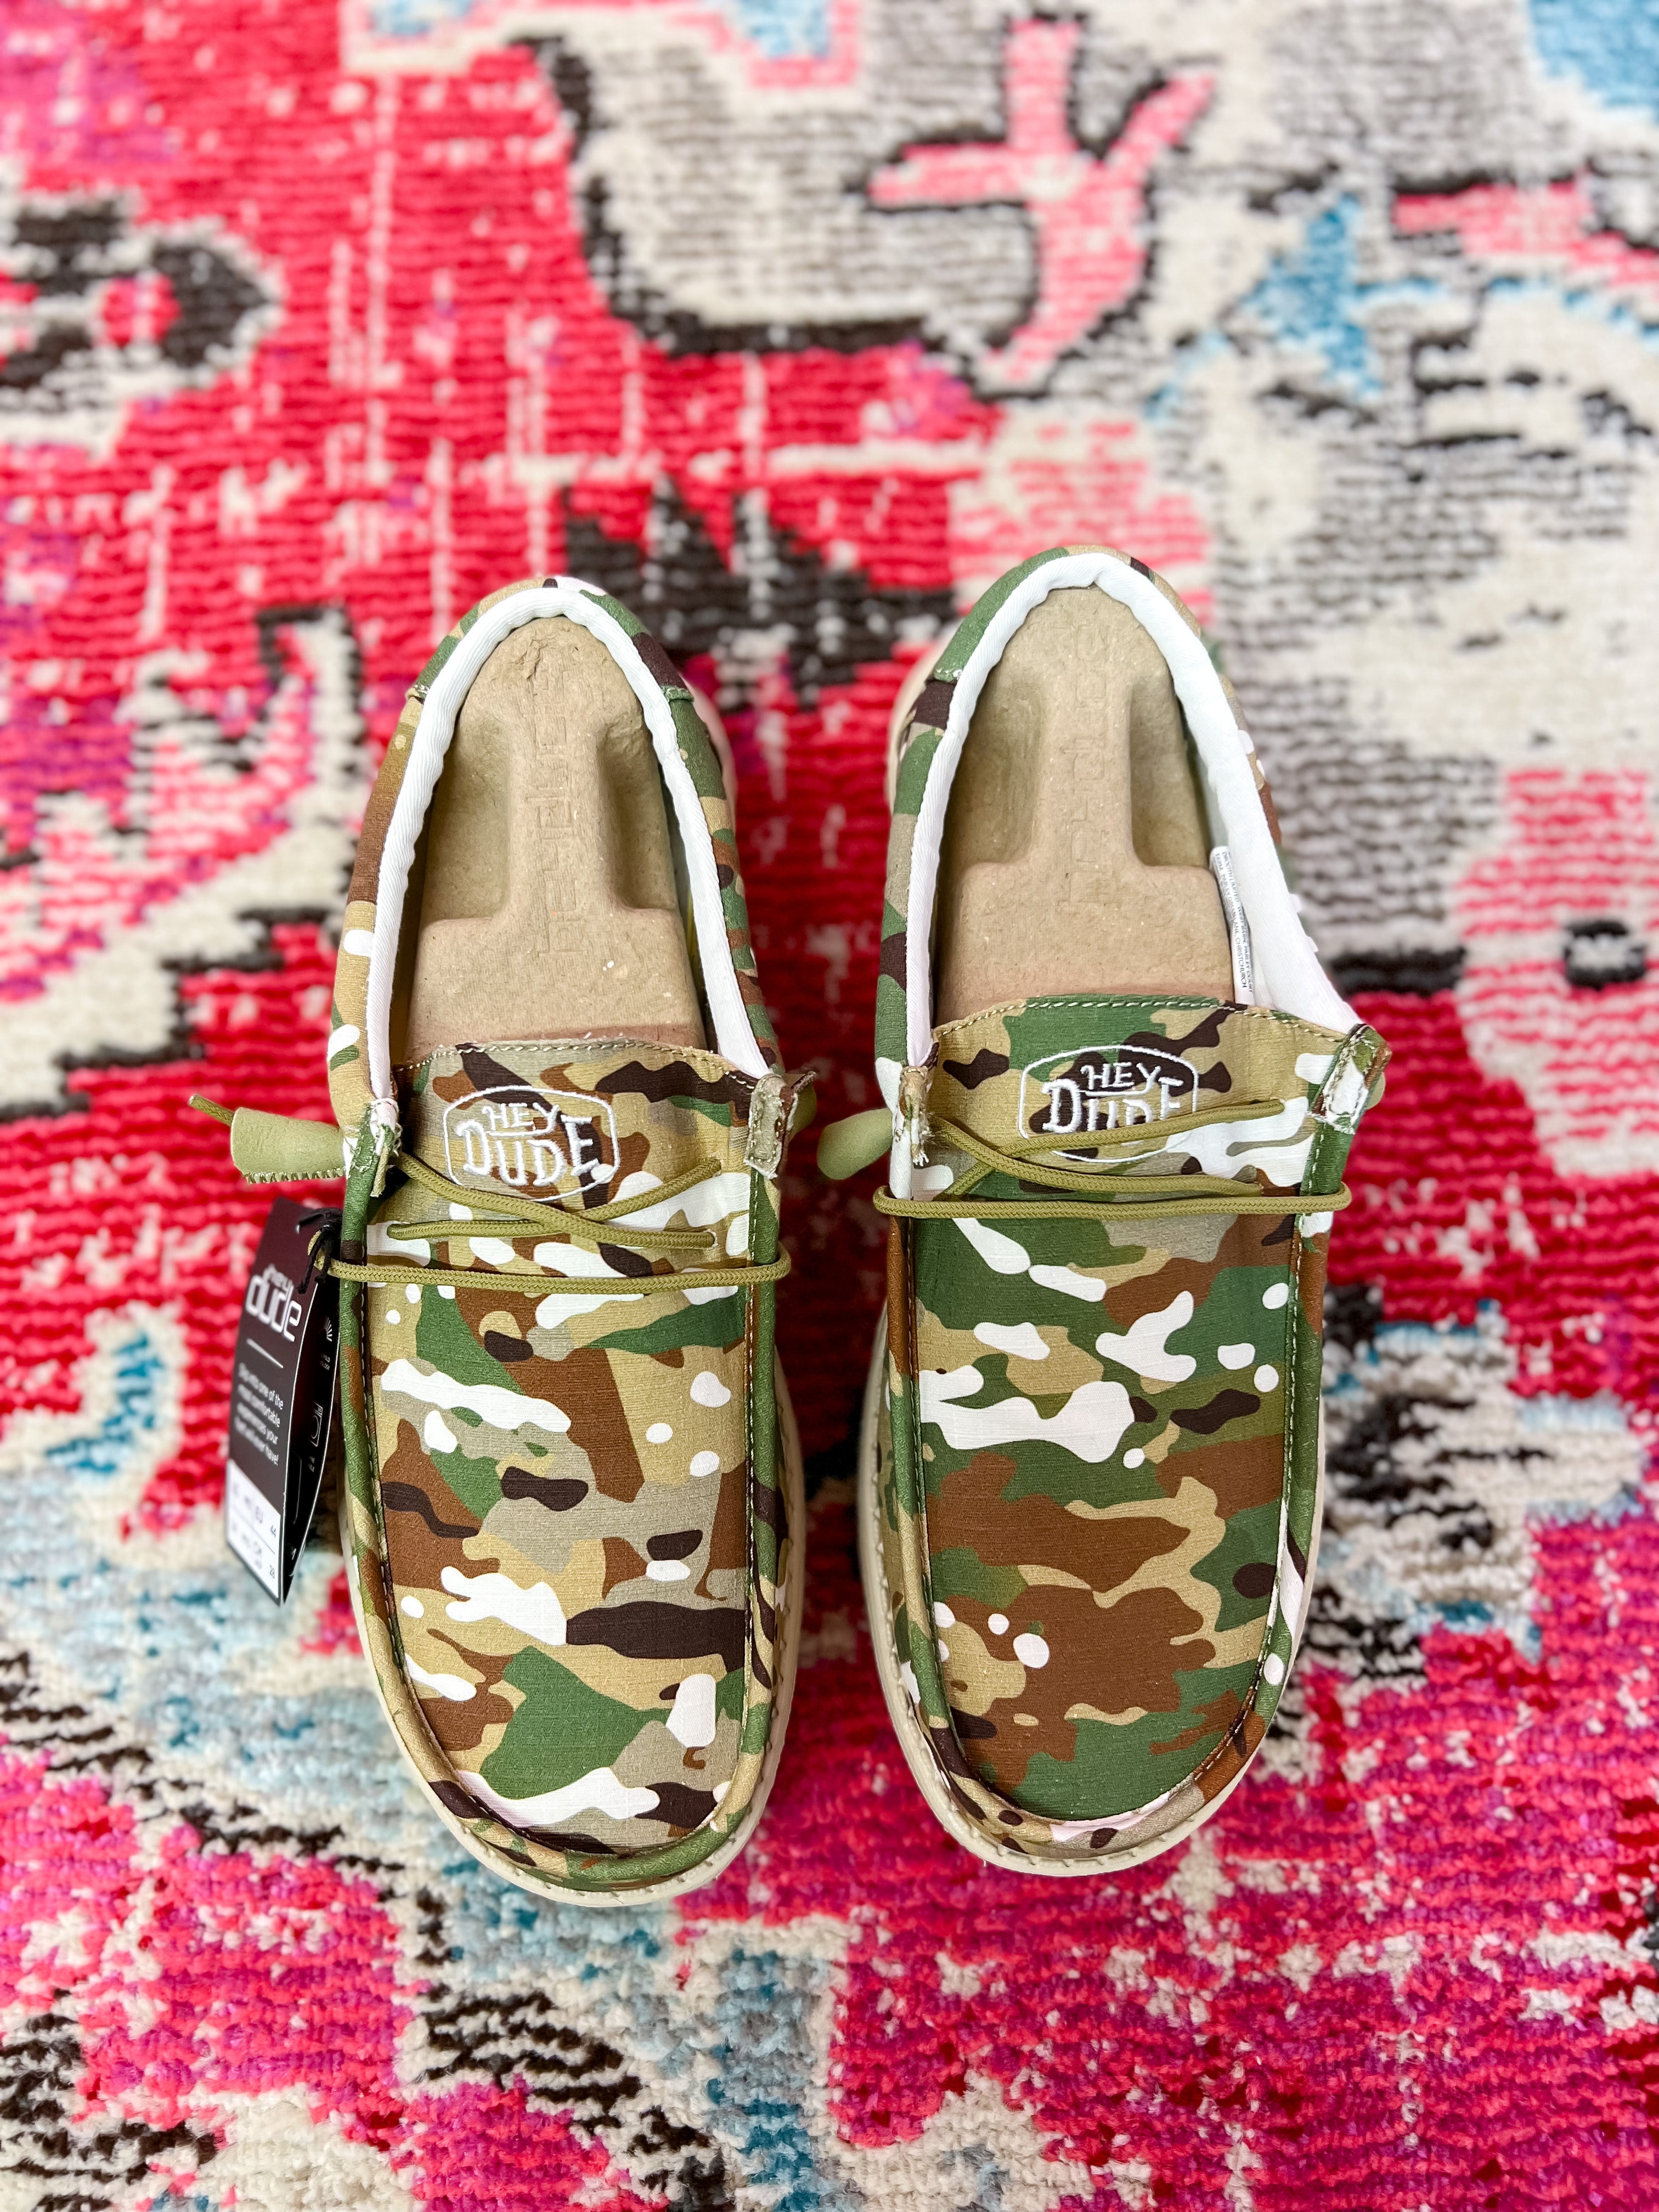 [Hey Dudes] Wally Camouflage